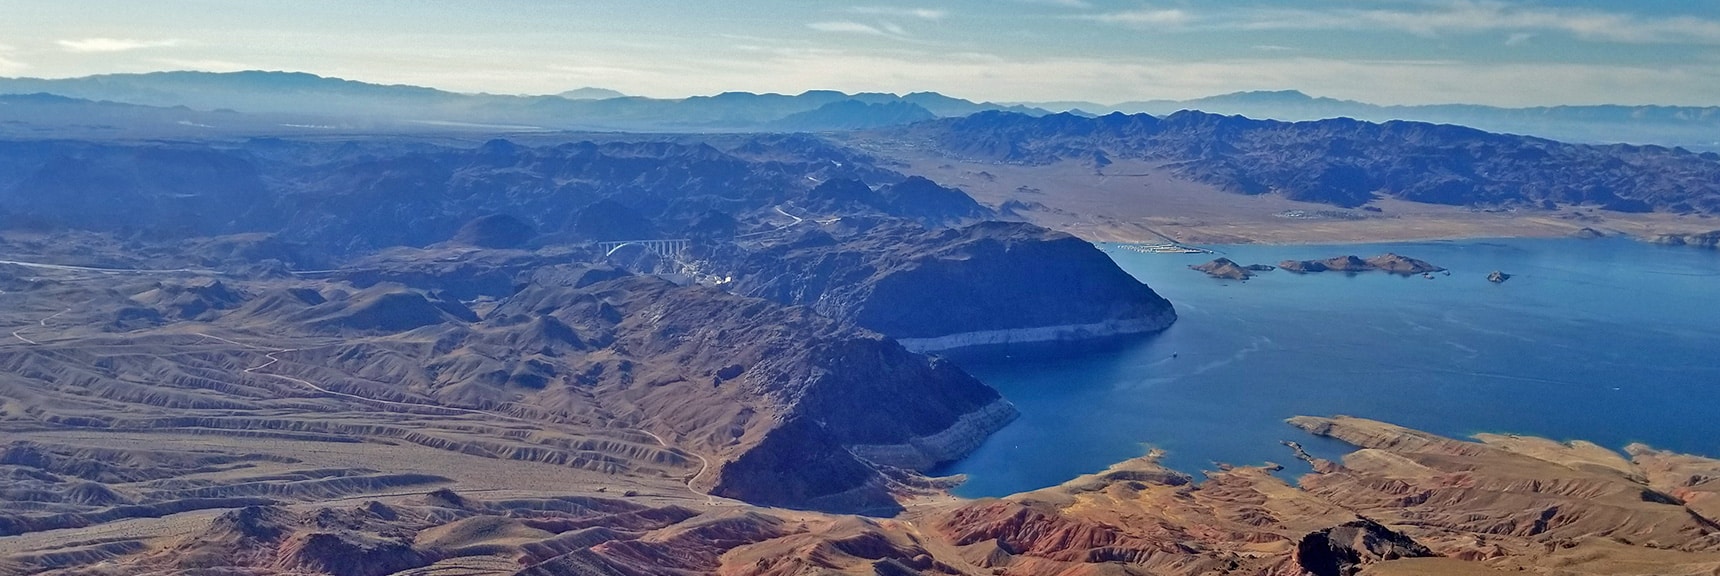 Hover Dam Area of Lake Mead from Fortification Hill Summit. | Fortification Hill | Lake Mead National Recreation Area, Arizona